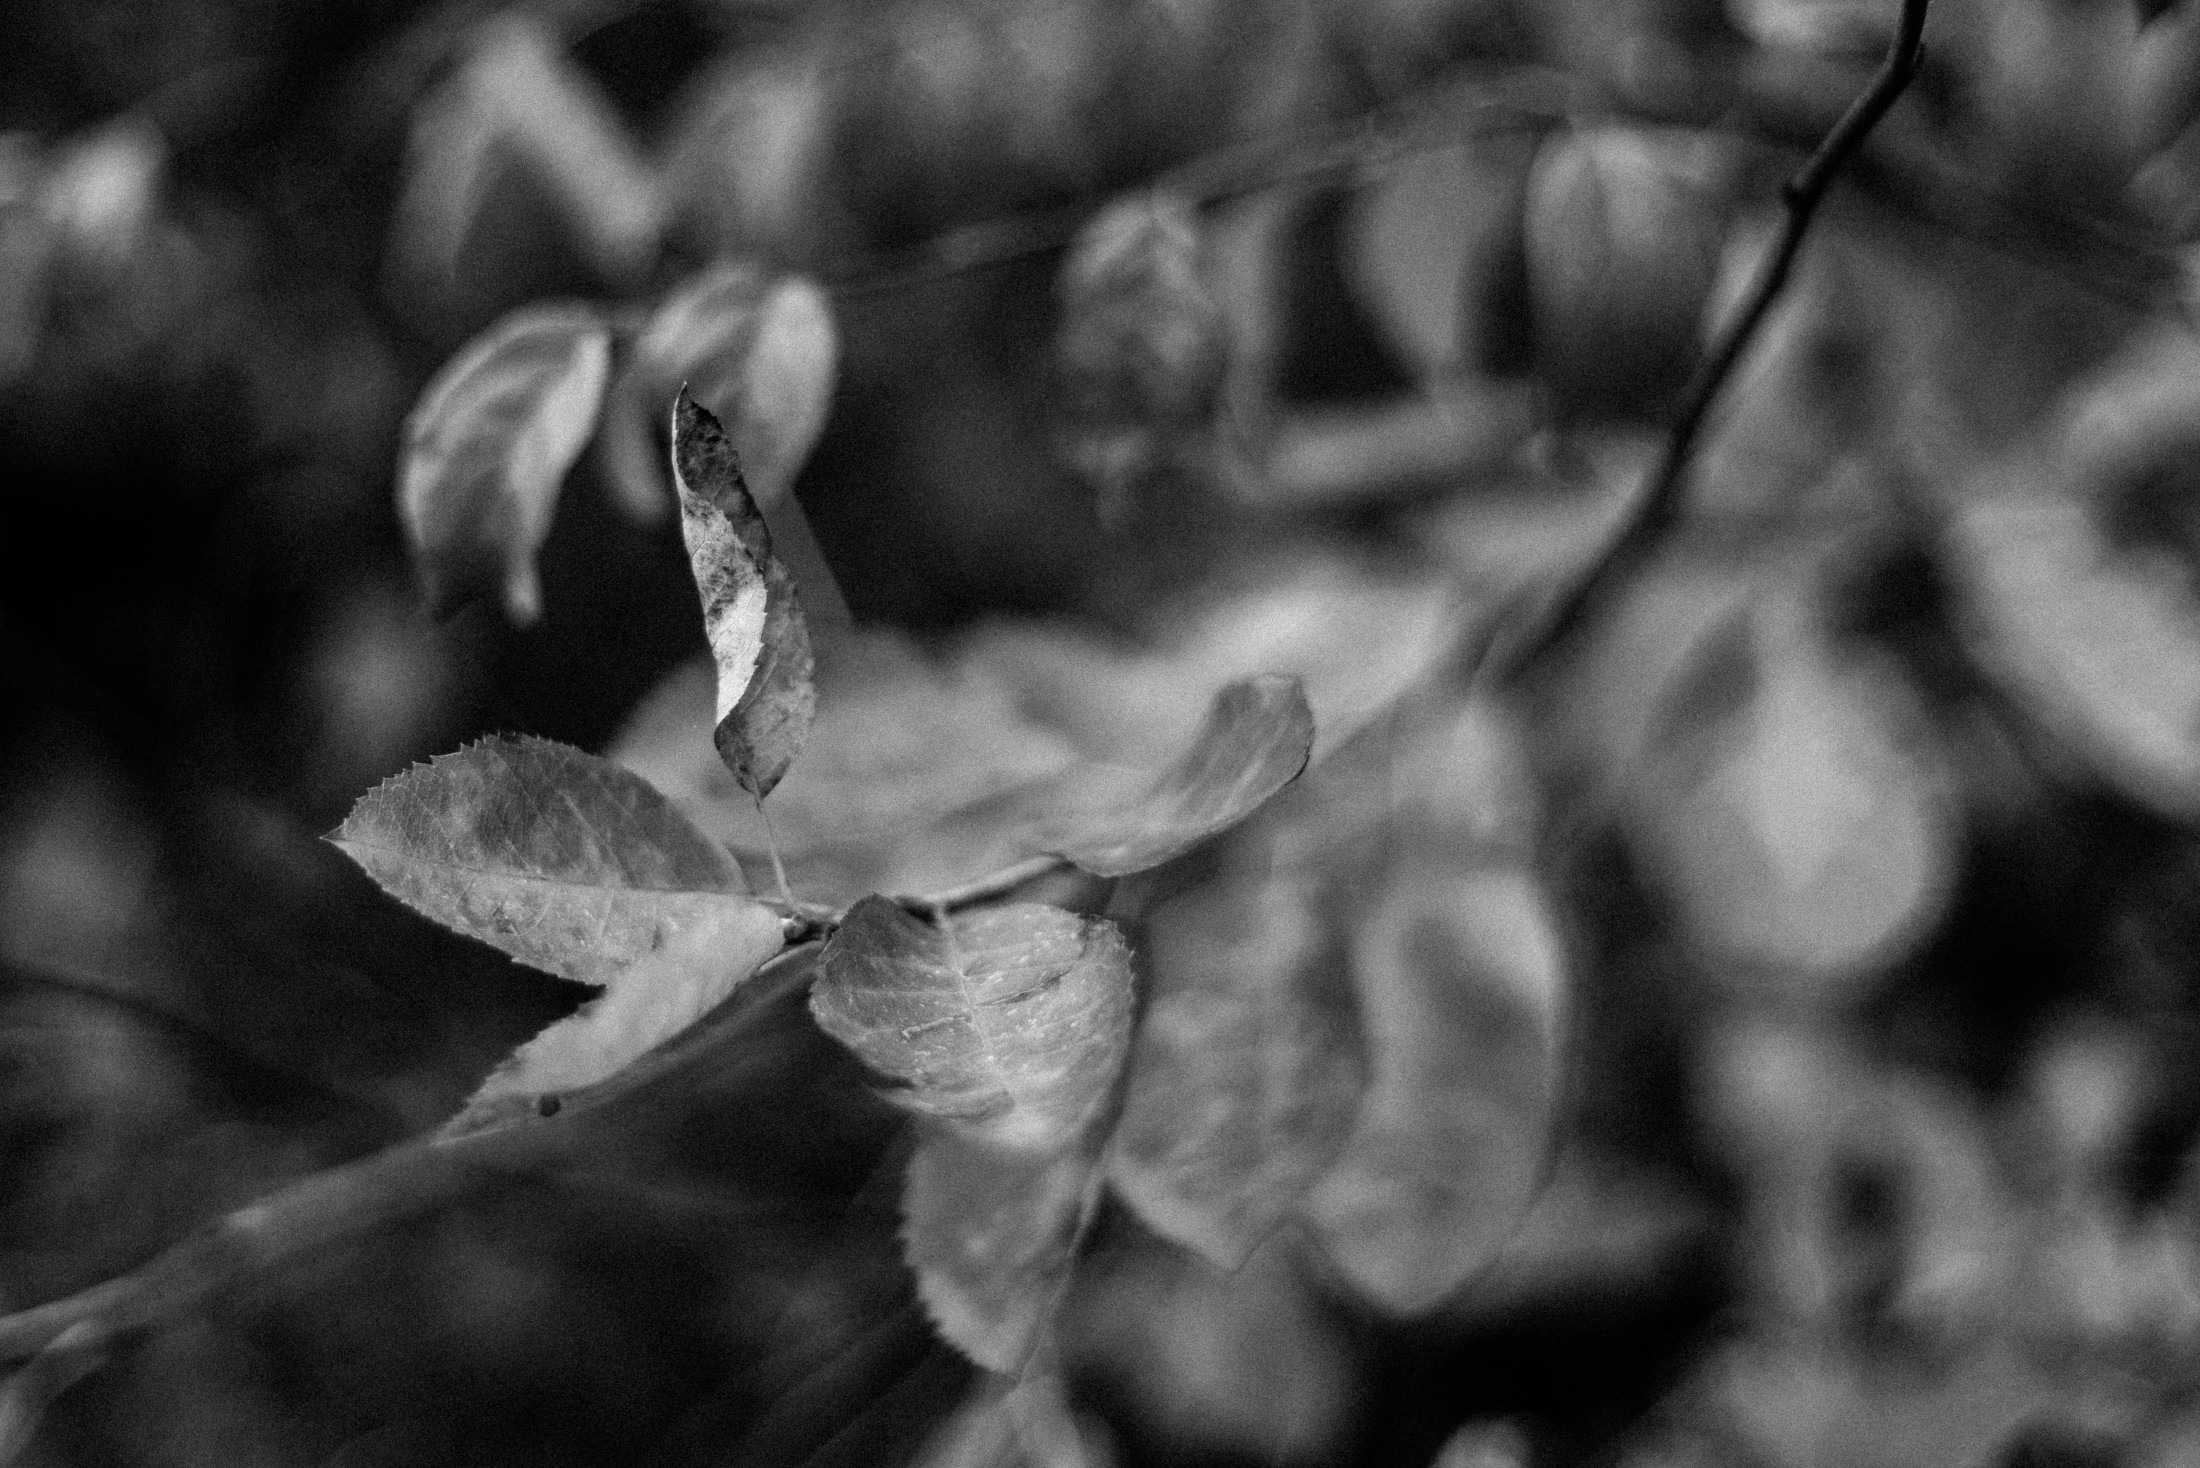 Diary - Promenade - Leaves on a tree branch